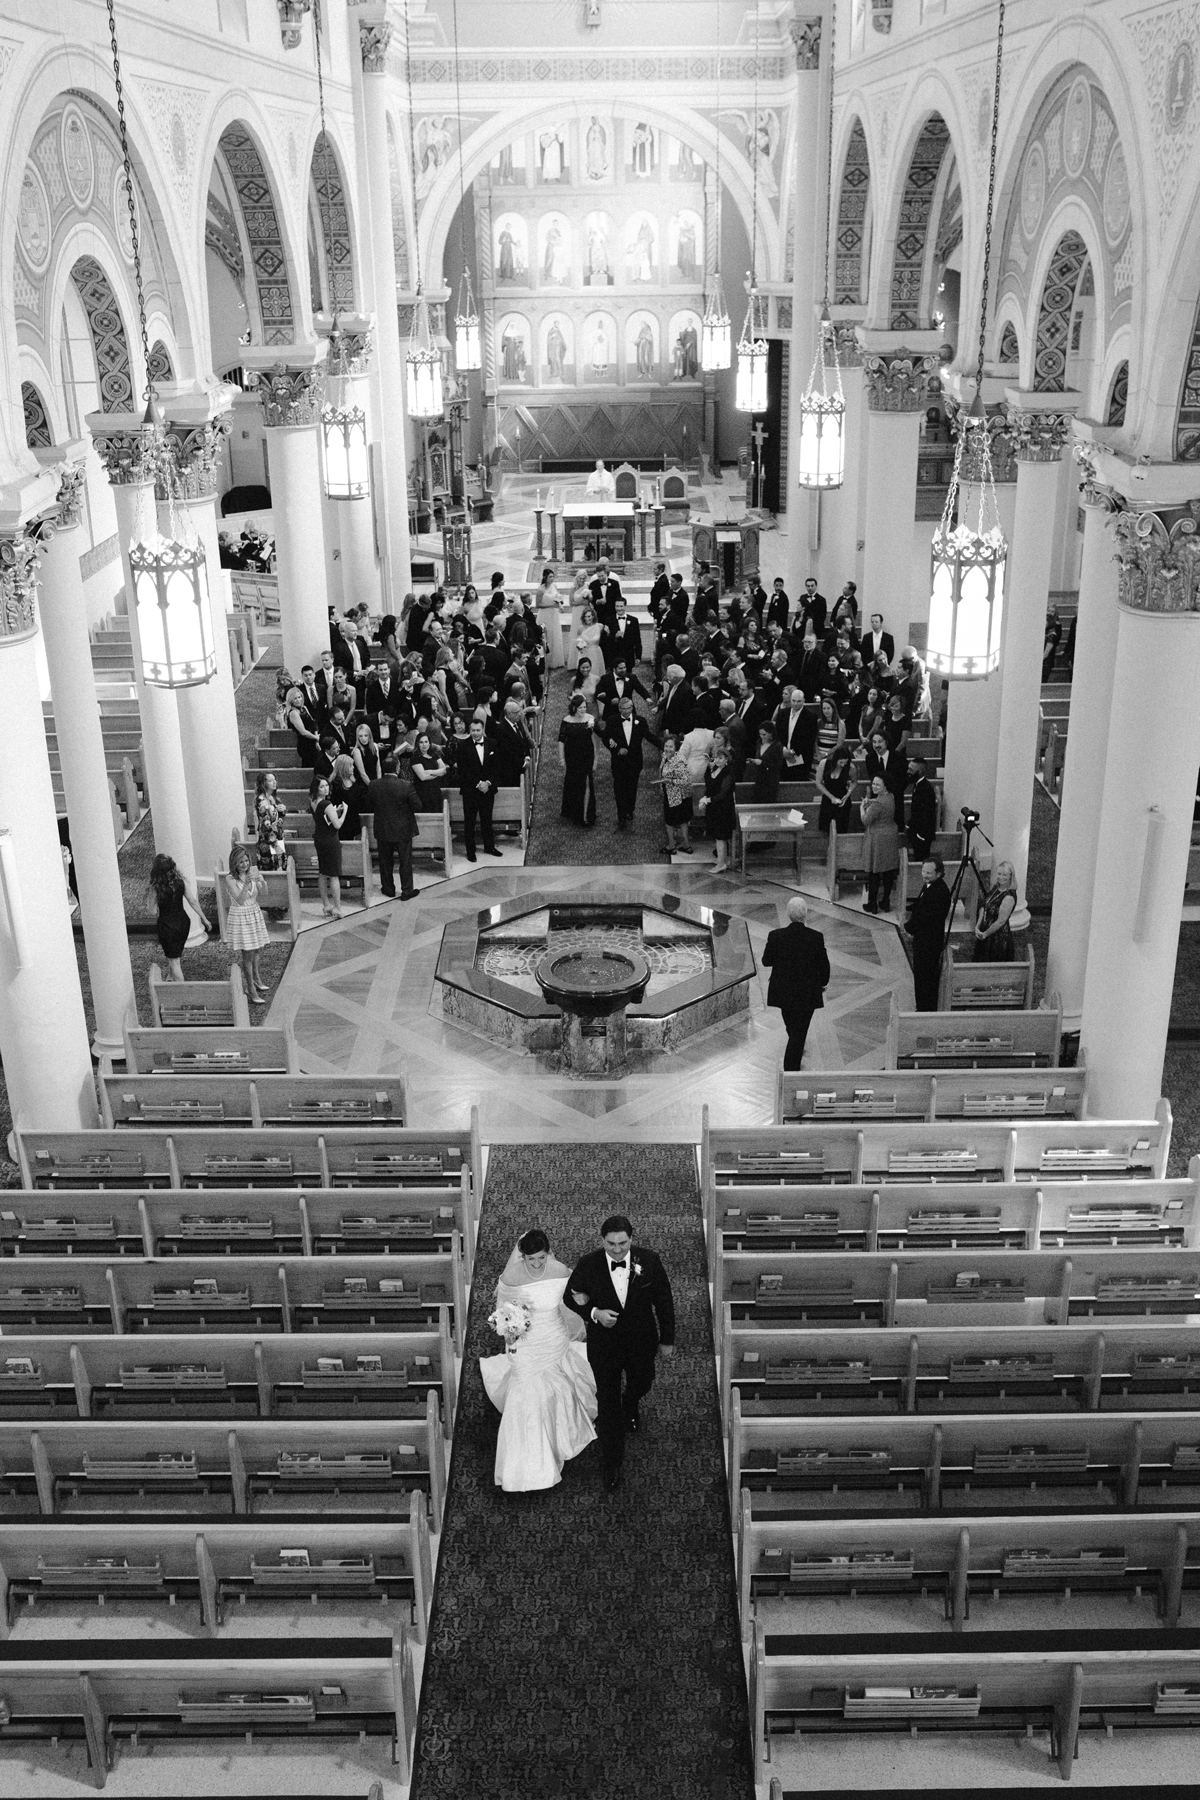  daytoremember.net | Blue Rose Photography | Cathedral Basilica of St. Francis of Assisi | El Dorado Hotel &amp; Spa | A Day To Remember Houston Luxury Wedding Planning and Design | Luxury Destination Wedding 